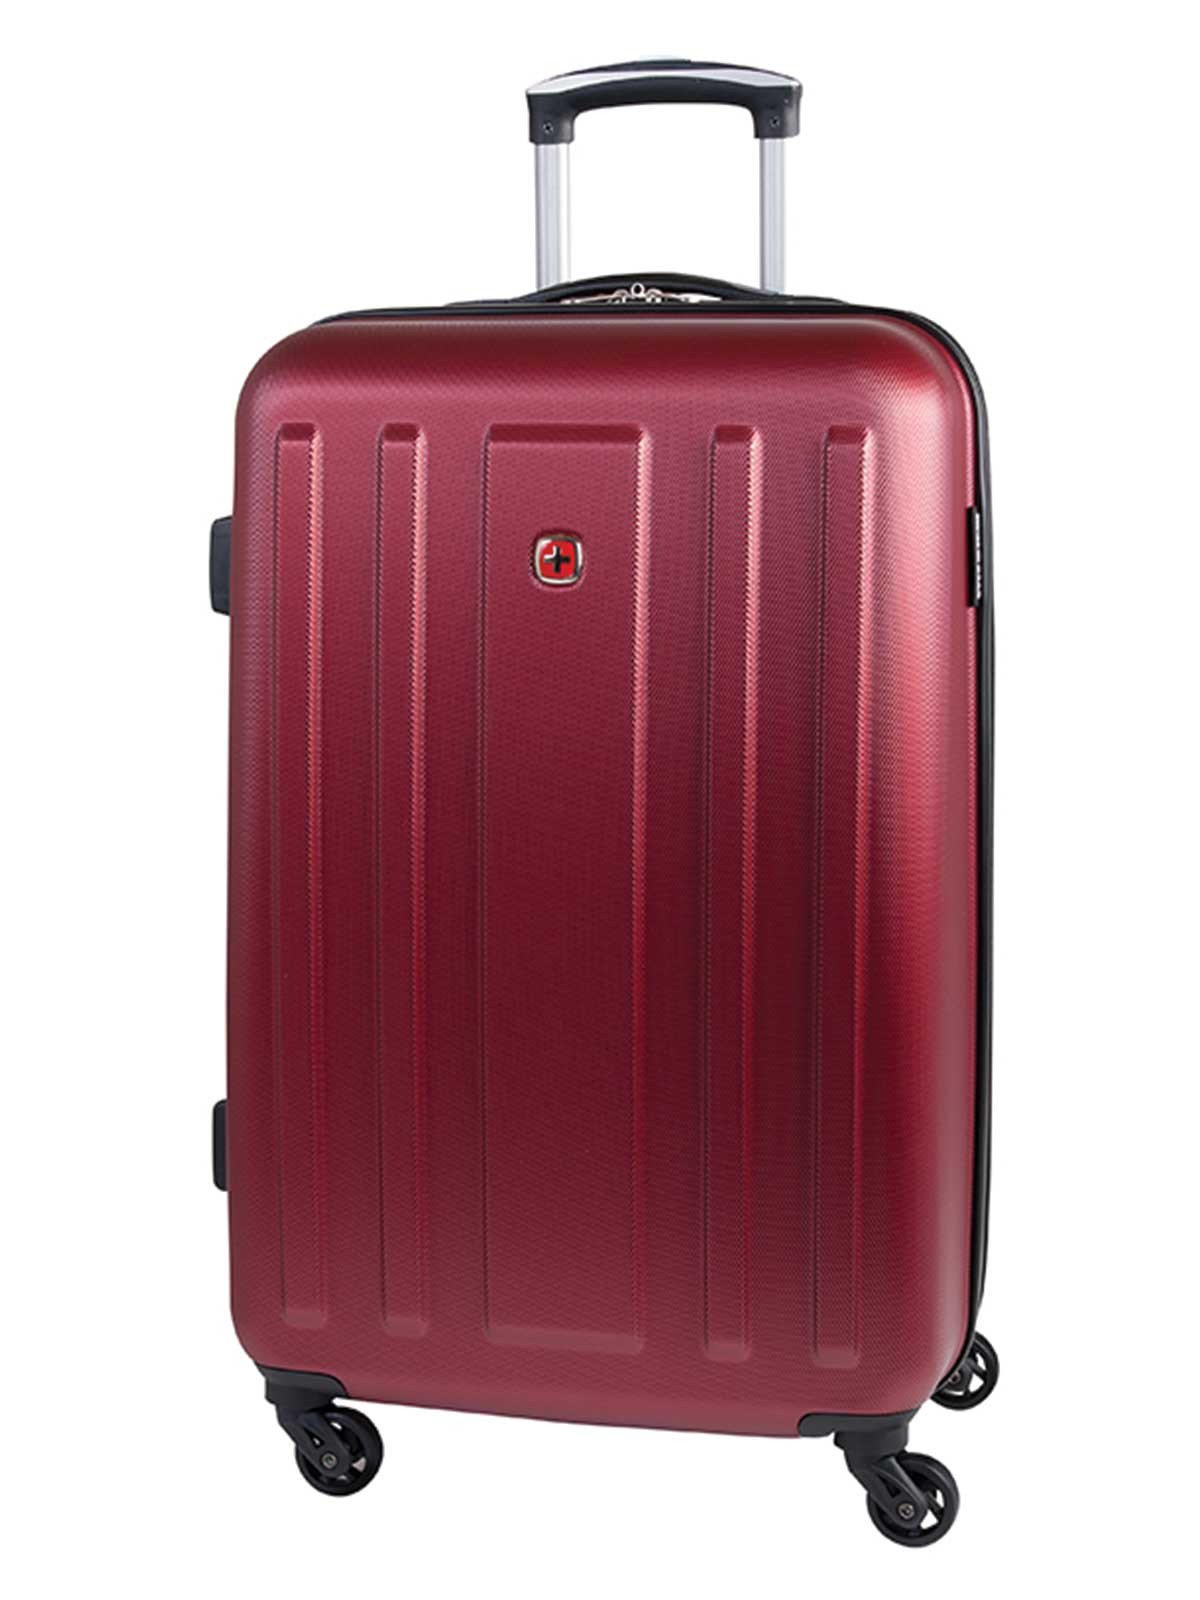 Swiss Gear ABS La Sarinne Lite 28 Inch Moulded Hardside Expandable Spinner Luggage - Oxblood